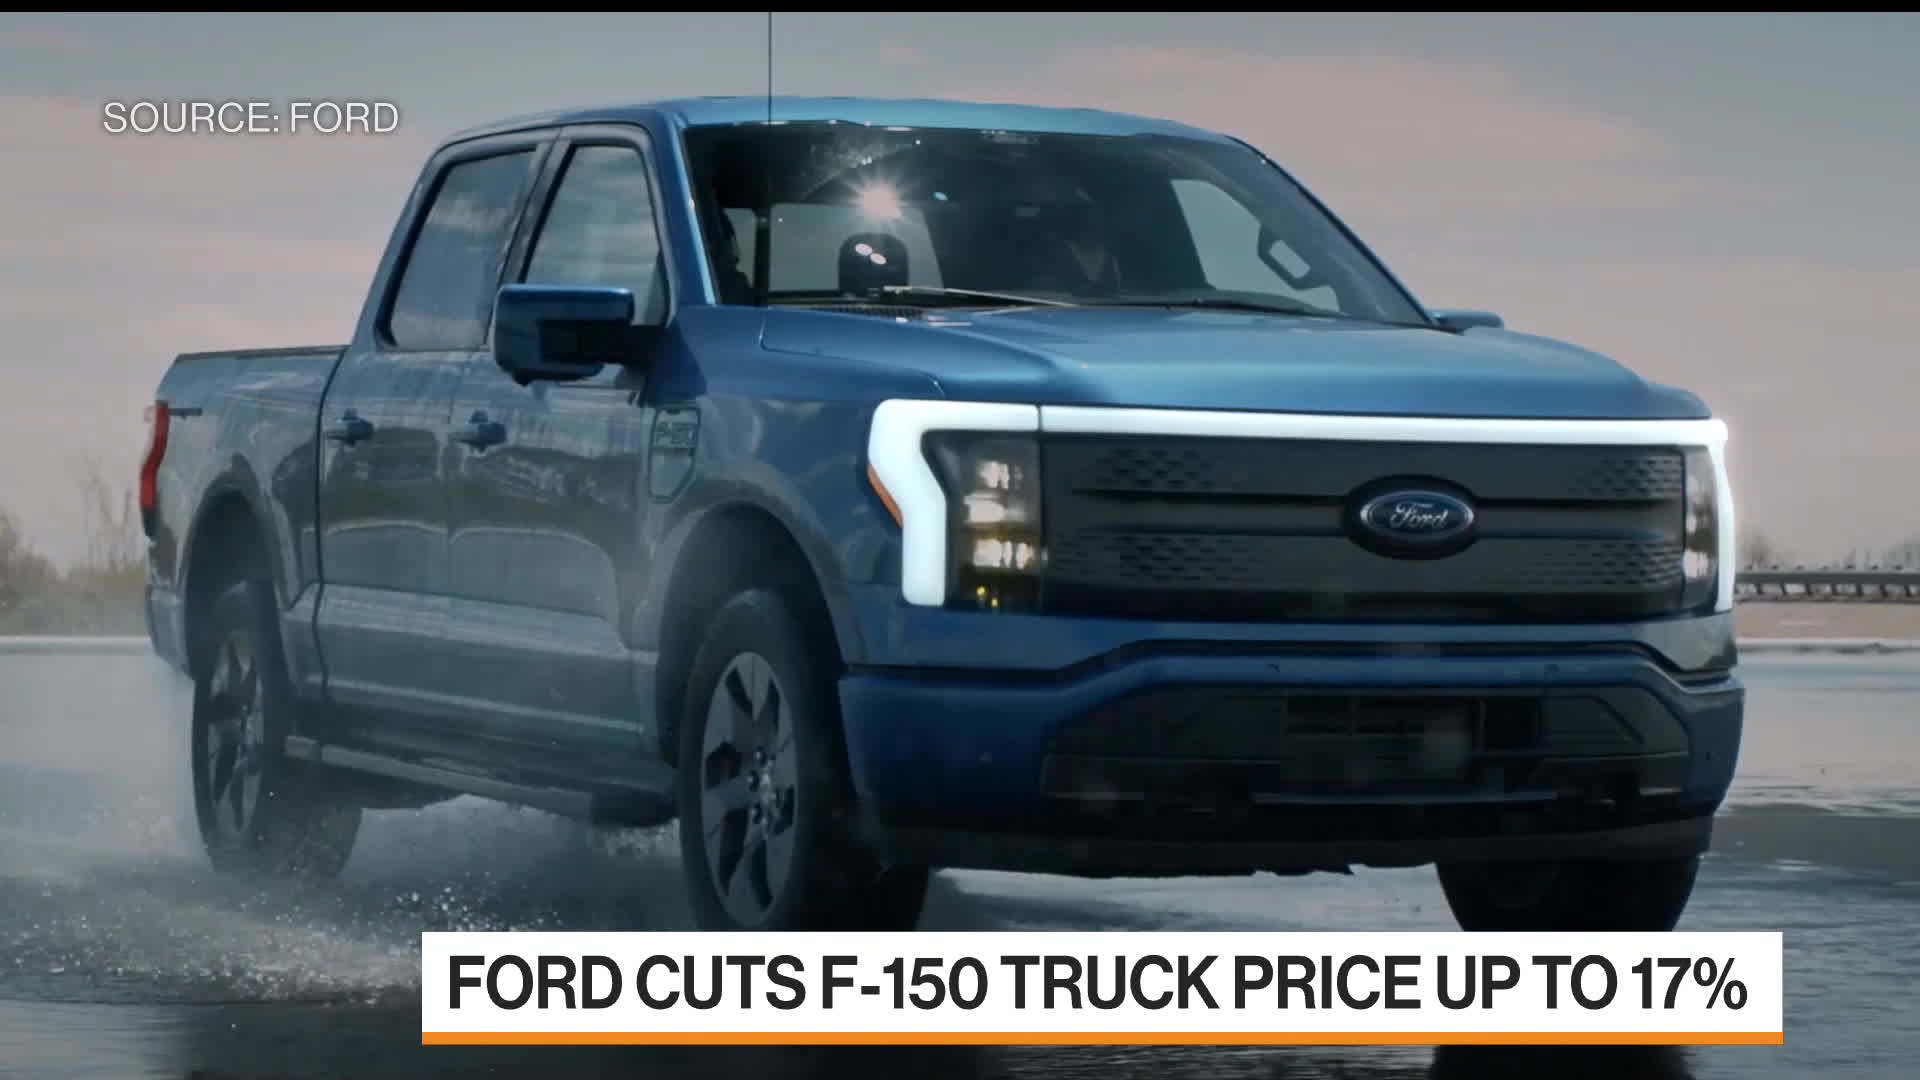 Ford unveils the all-new F-150 pickup truck: What to know - ABC News